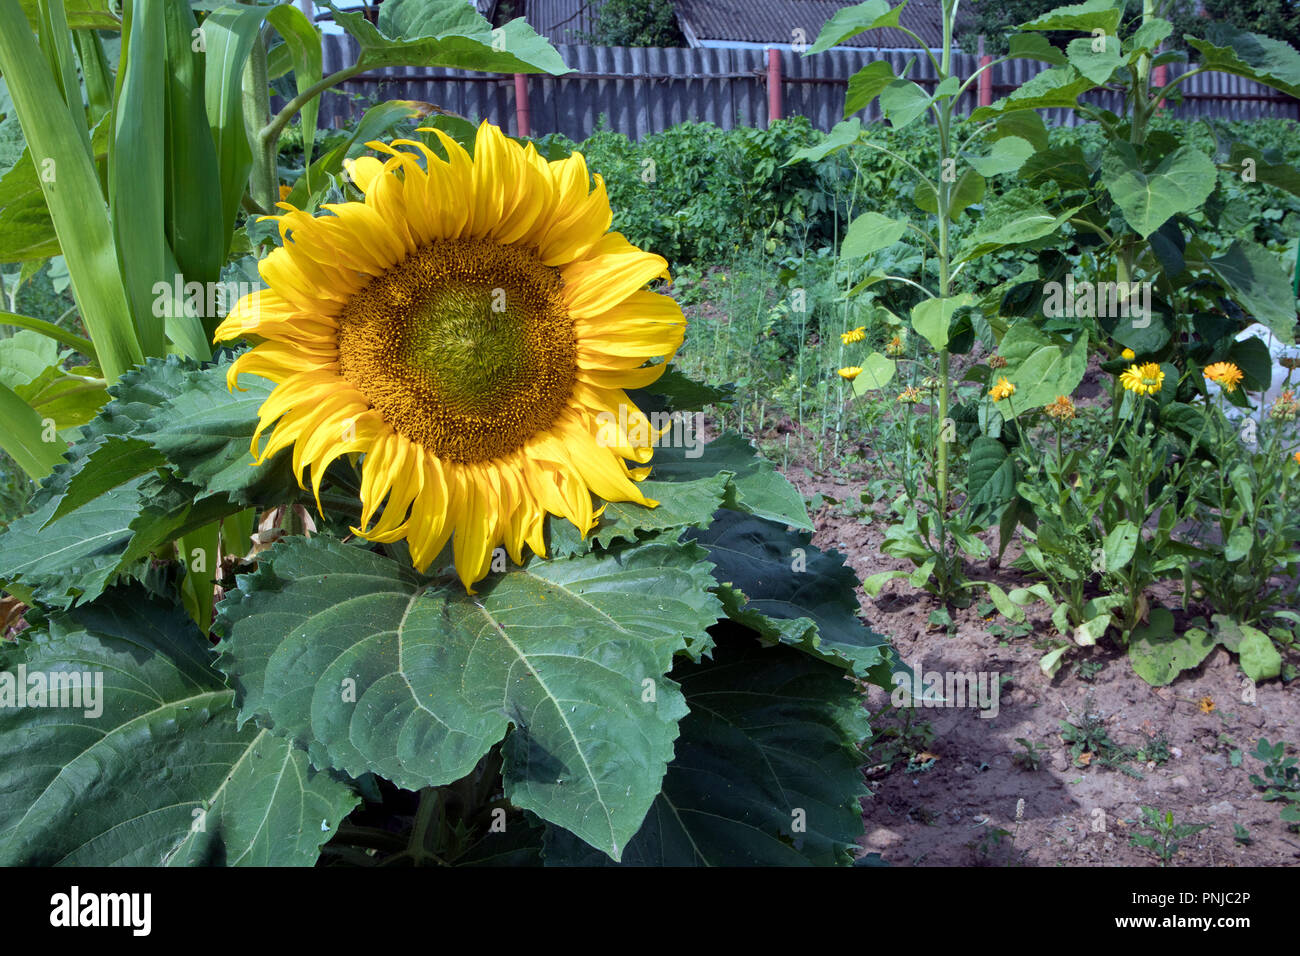 Bright single sunflower with lurk bumble bee growing in a garden between green foliage Stock Photo